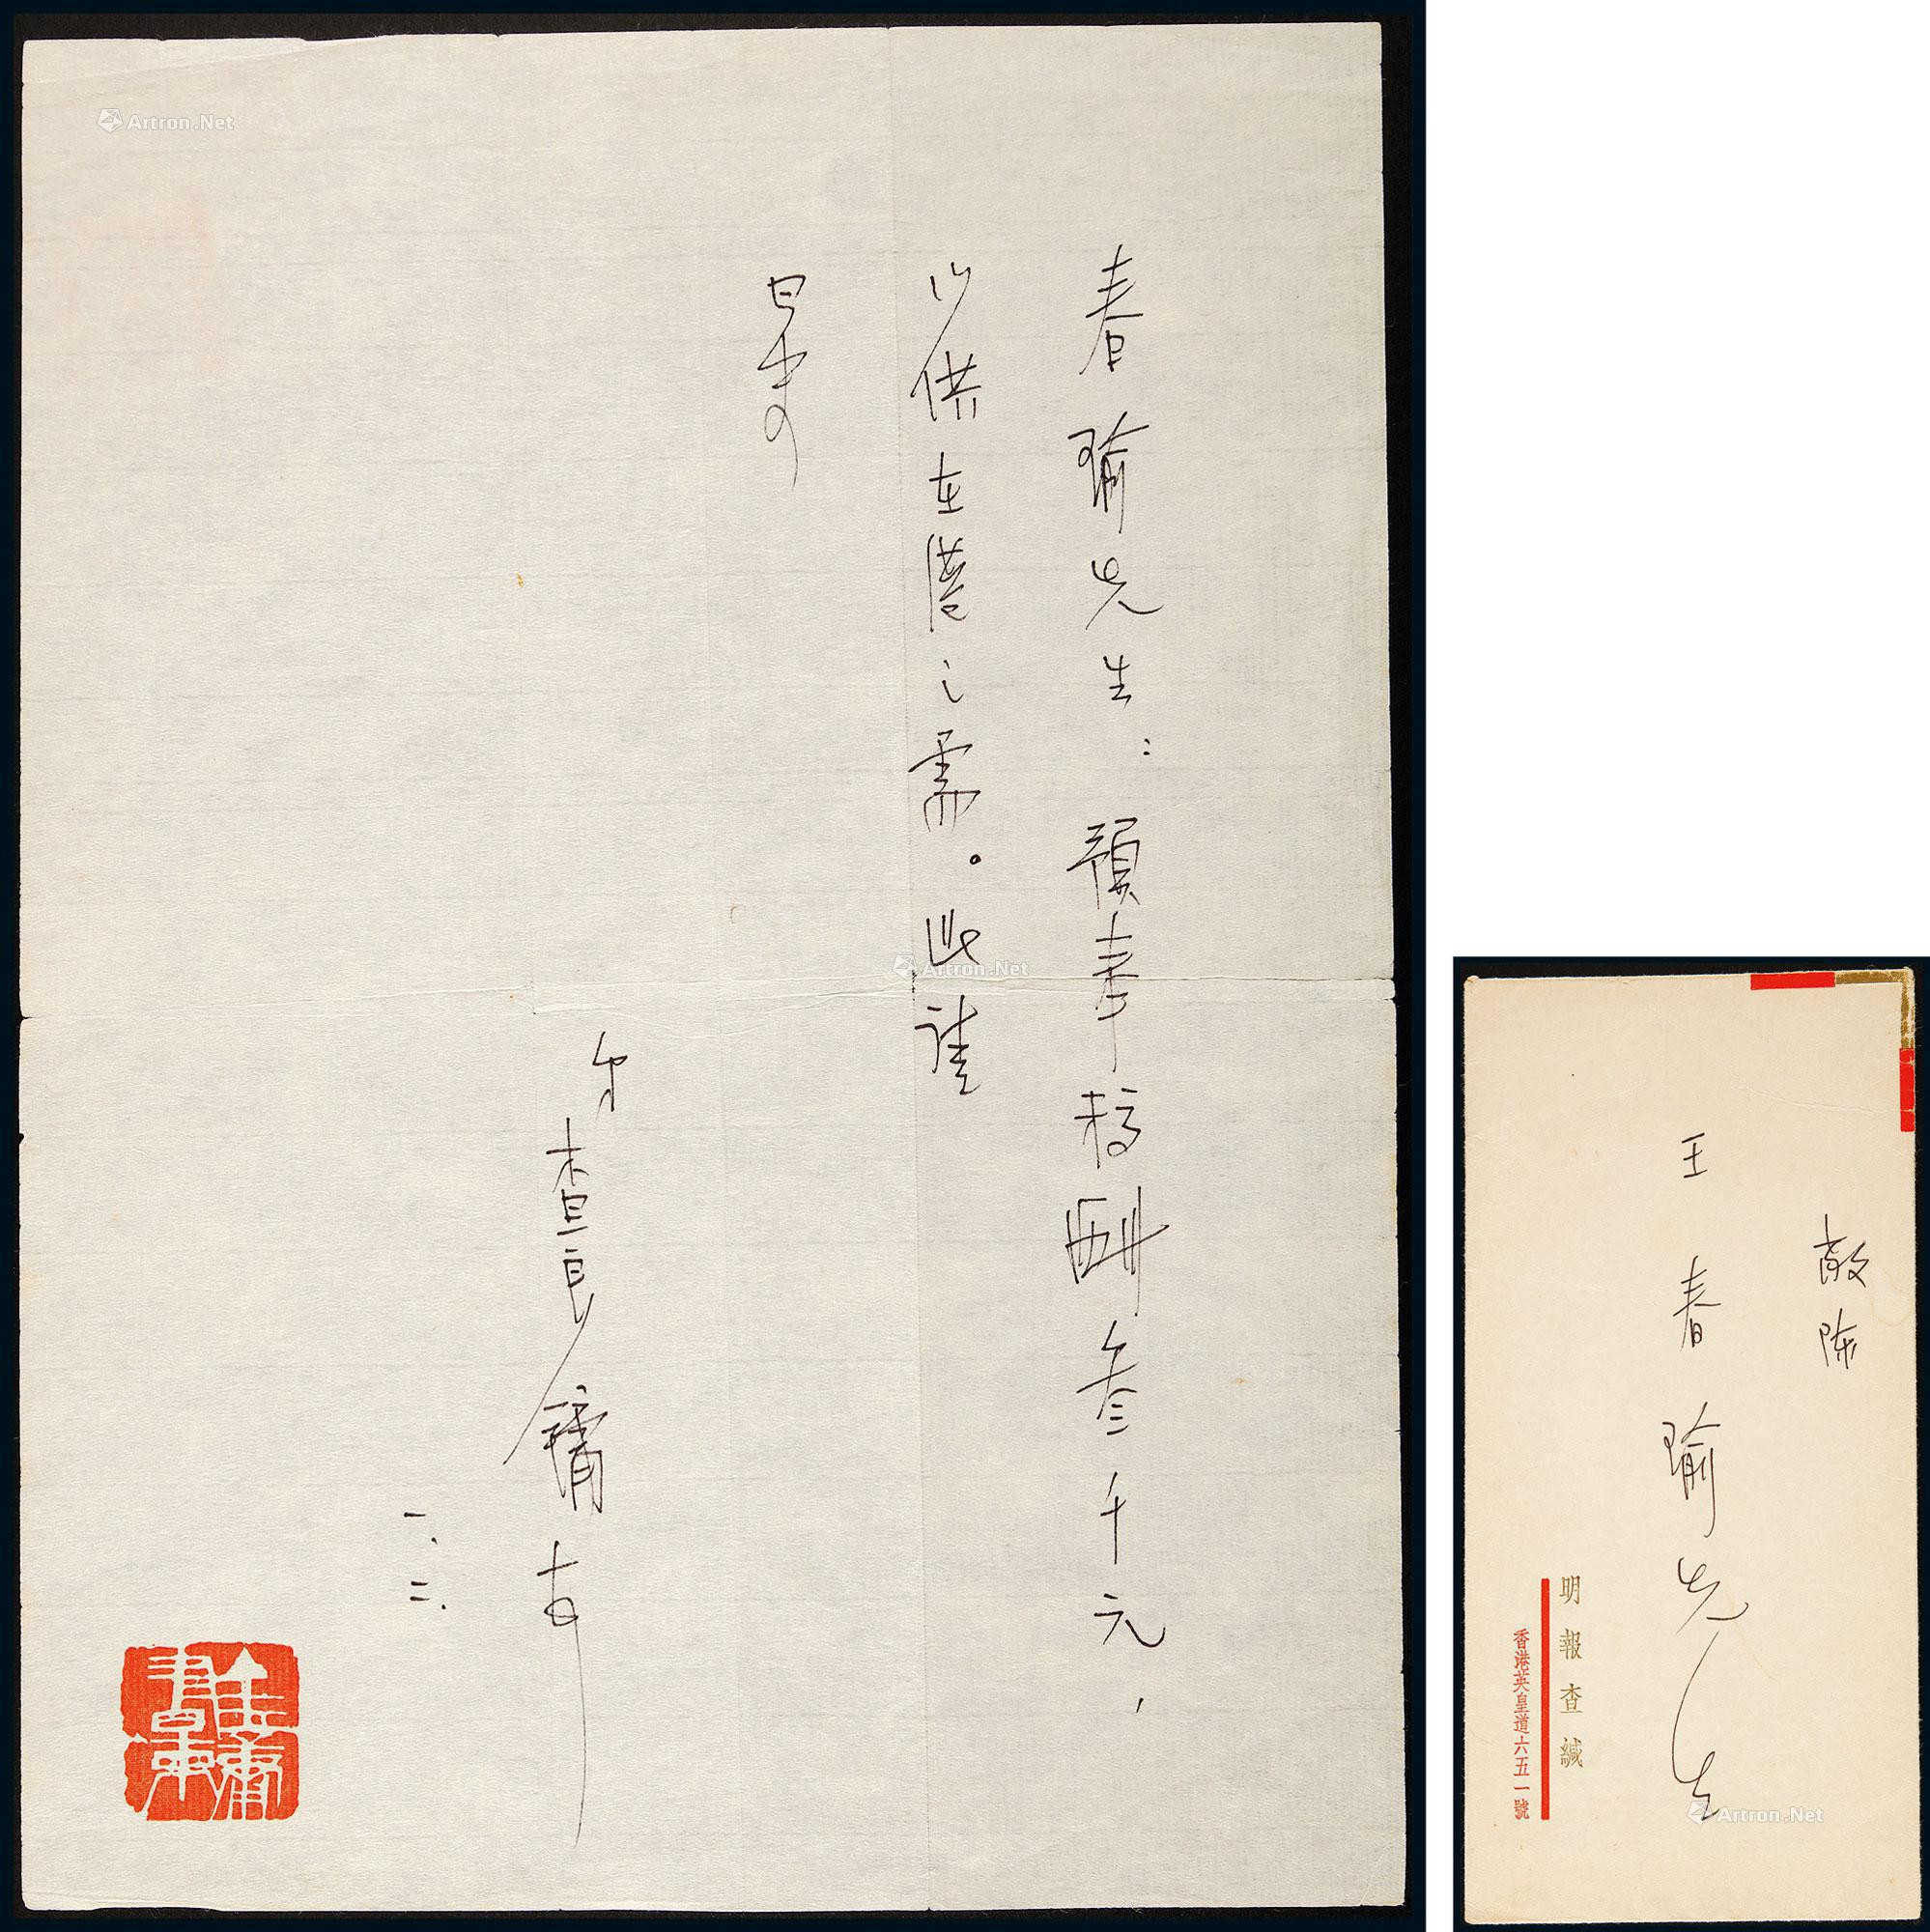 Letter of one page by Jin Yong to Wang Chunyu, with original cover